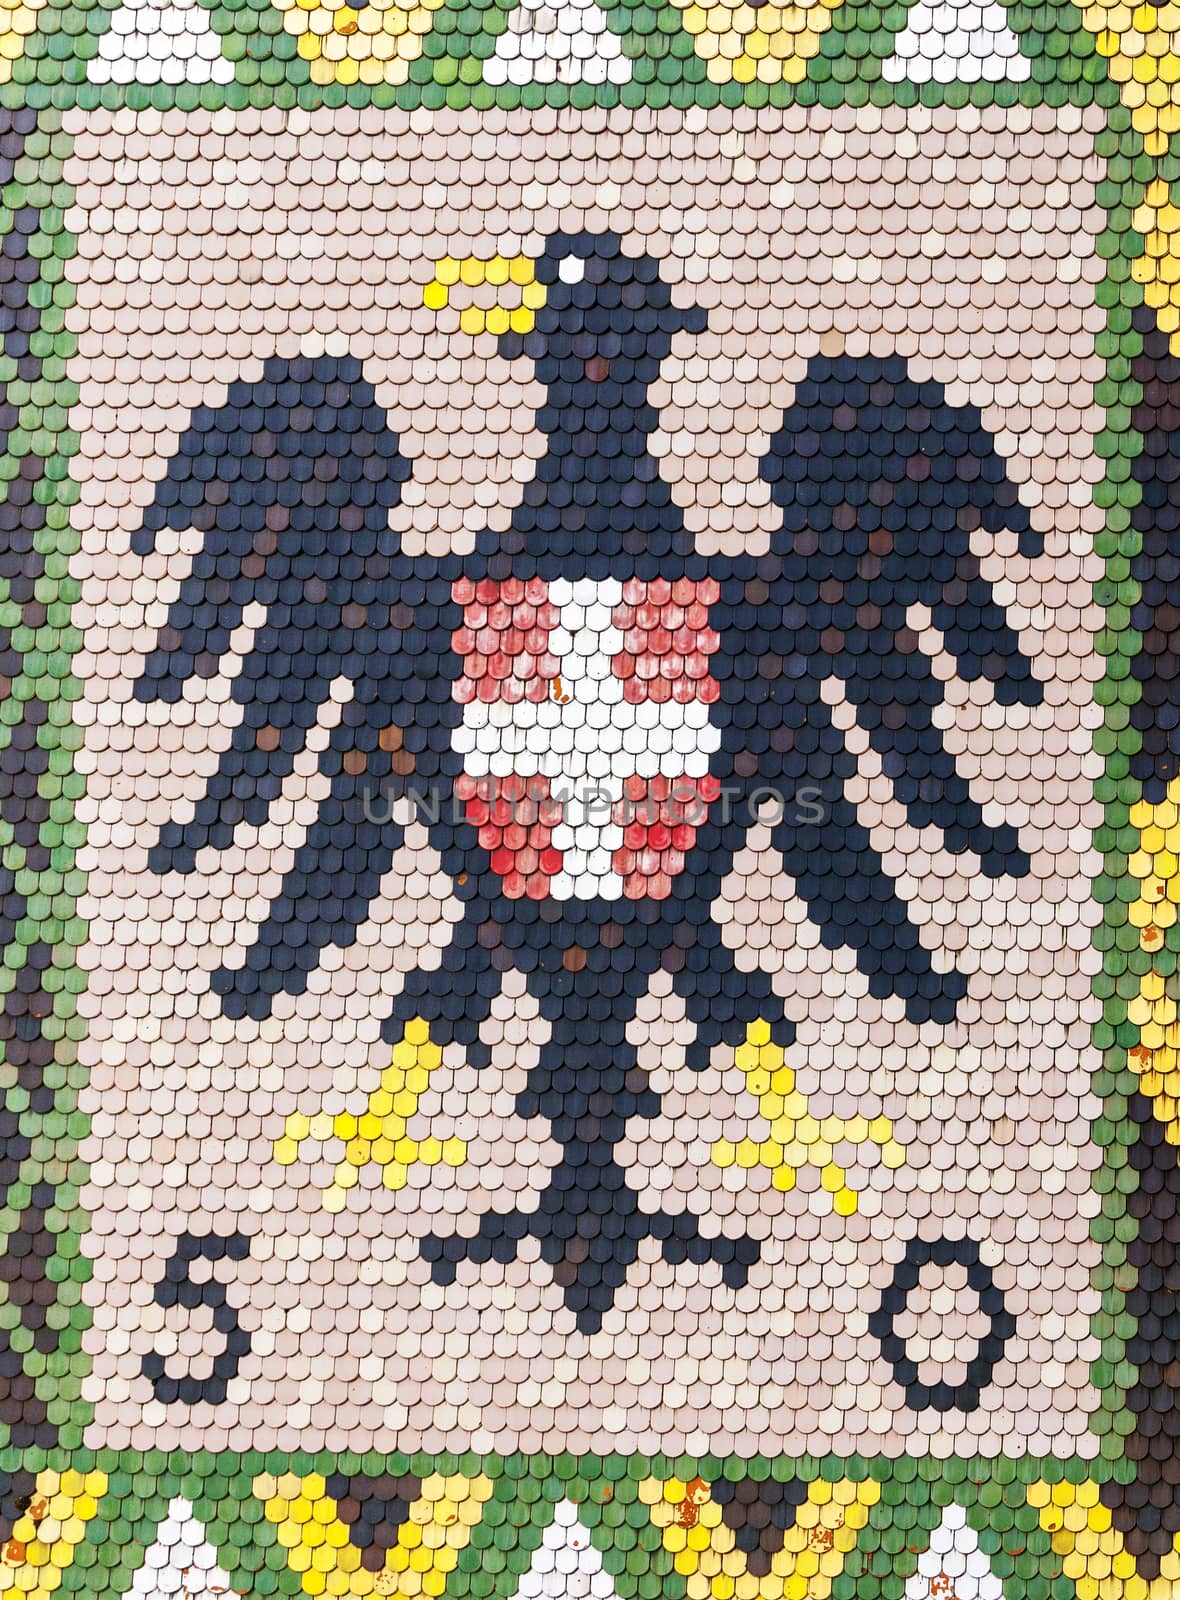 Austrian coat of arms on roof of Stephansdom cathedral, Vienna by Goodday